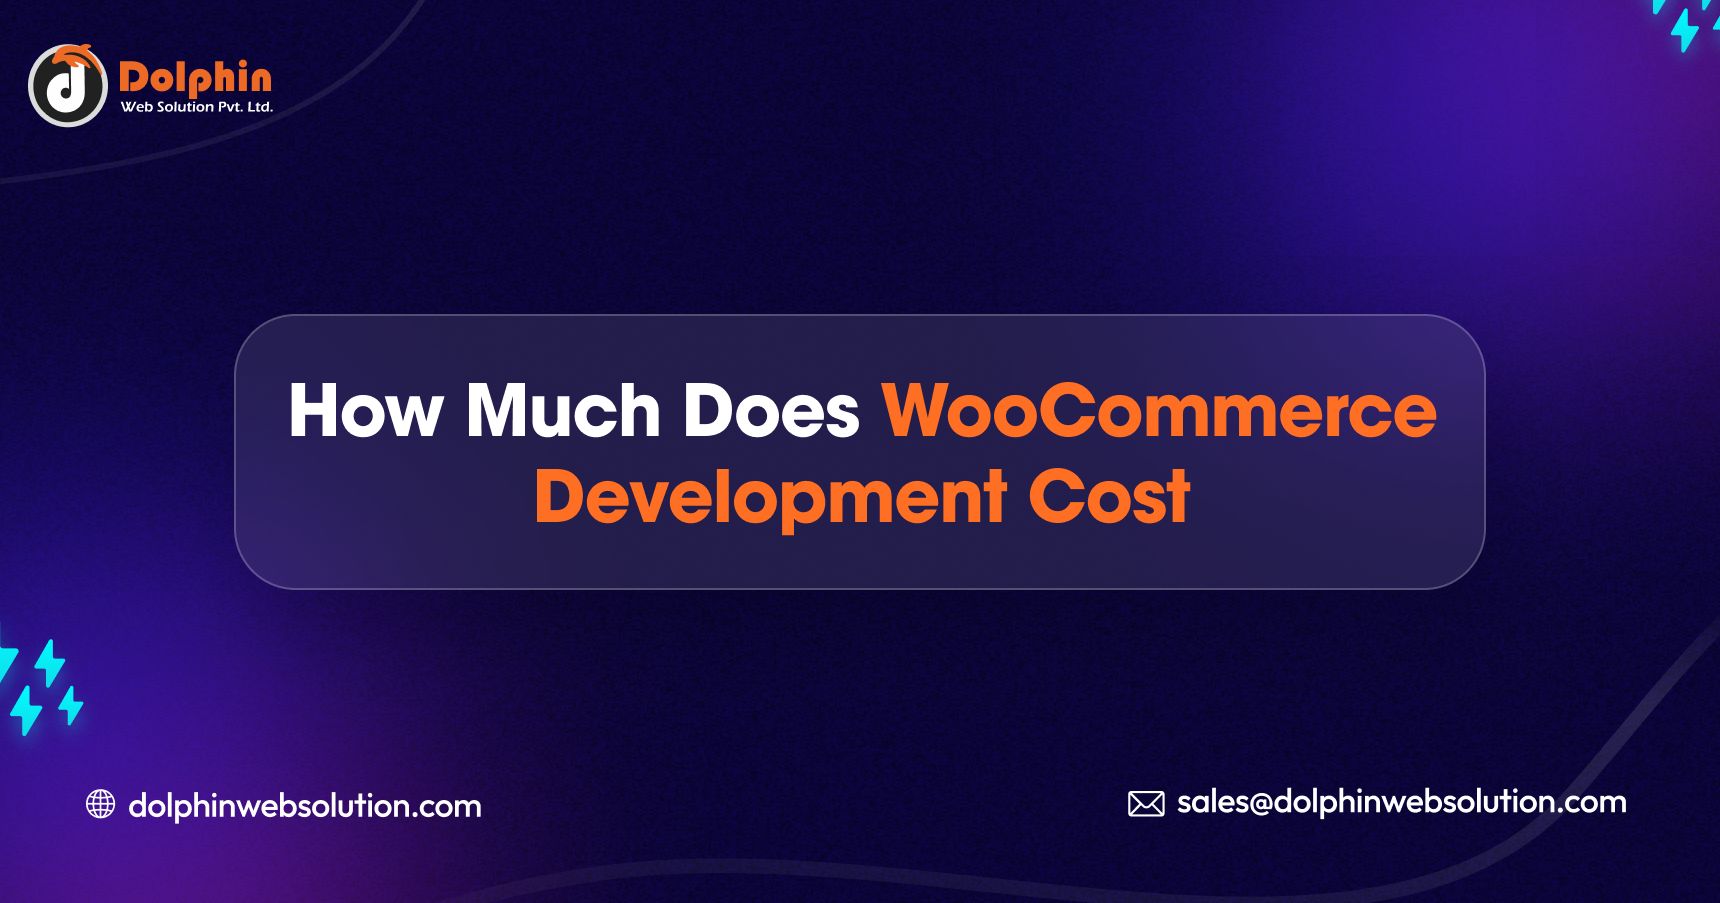 How Much Does WooCommerce Development Cost?